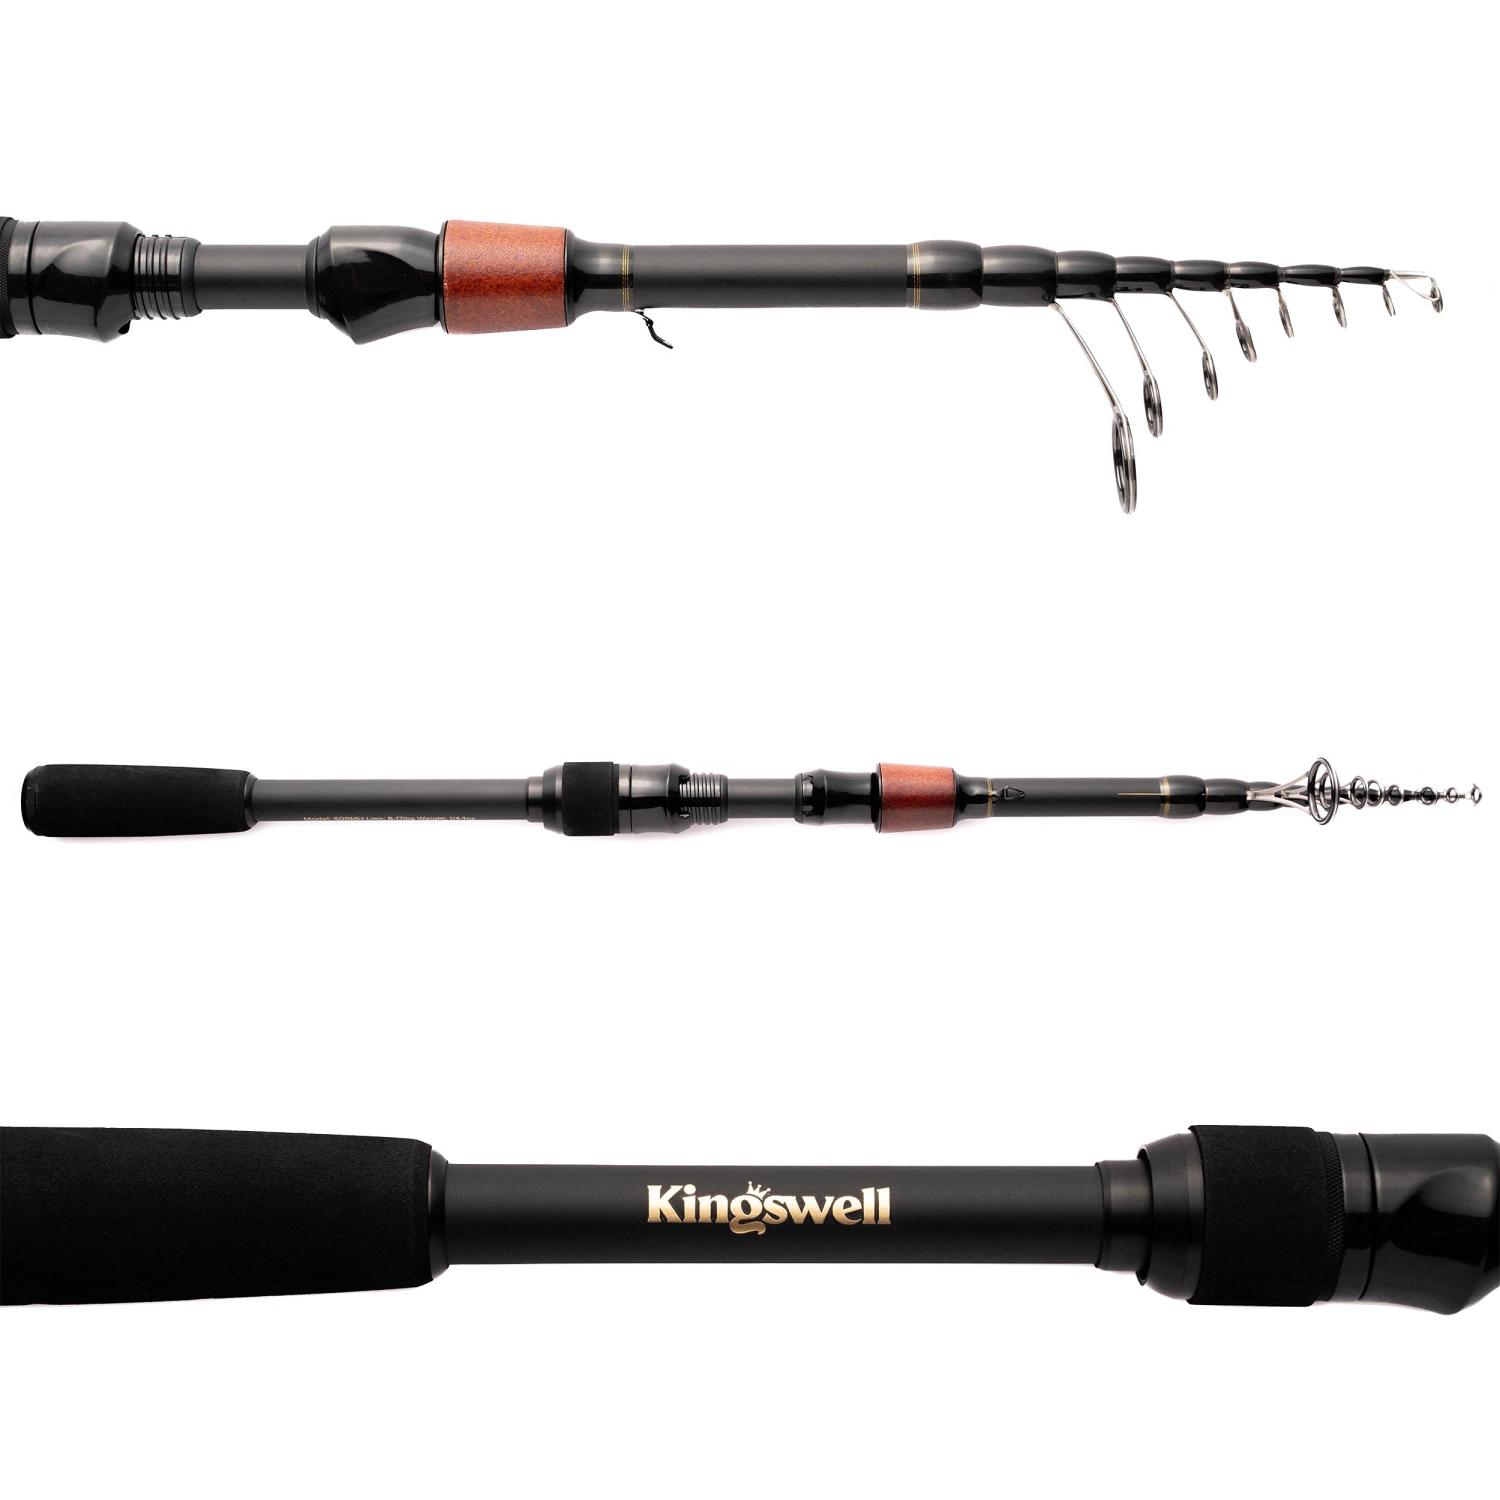 KINGSWELL Telescopic Fishing Rod and Reel Combo, Premium Graphite Carbon  Collapsible Fishing Pole with Spinning Reel, Portable Travel kit for Adults  Kids Rod Only 6.8 Feet